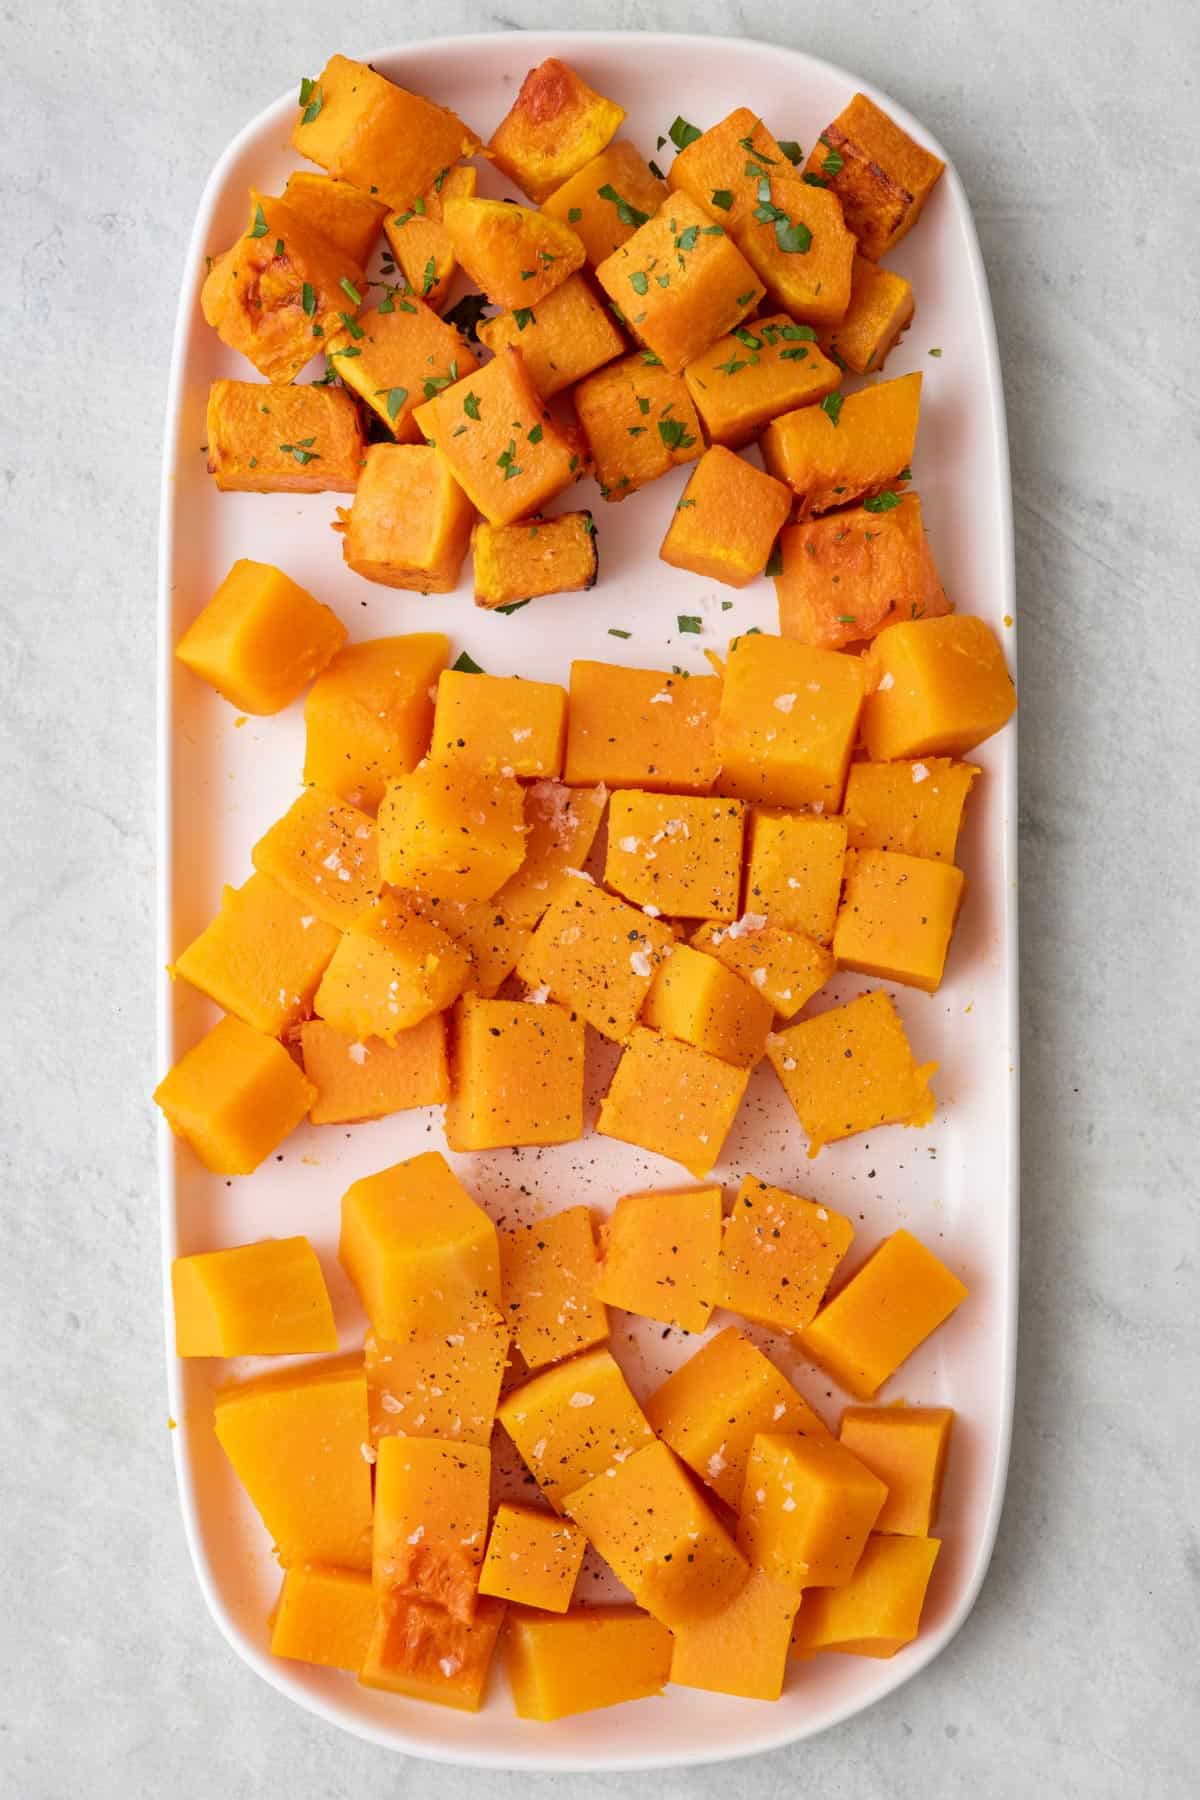 Butternut squash cut into cubes and cooked three different ways on a large platter, some garnished with pasley and flaky salt.